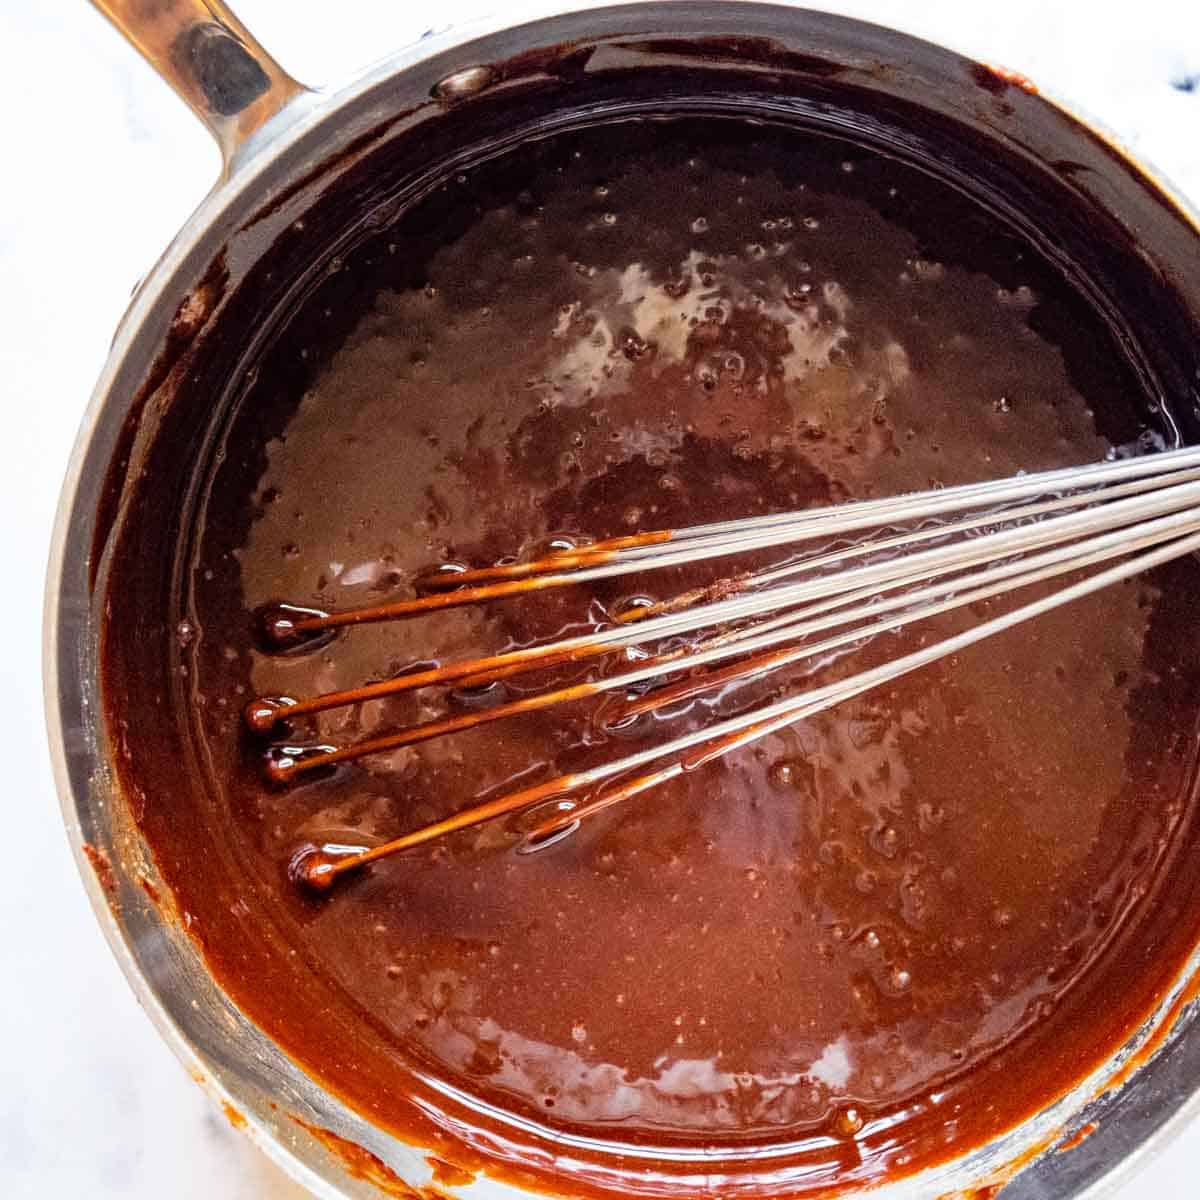 a whisk in the saucepan after the eggs have been added.